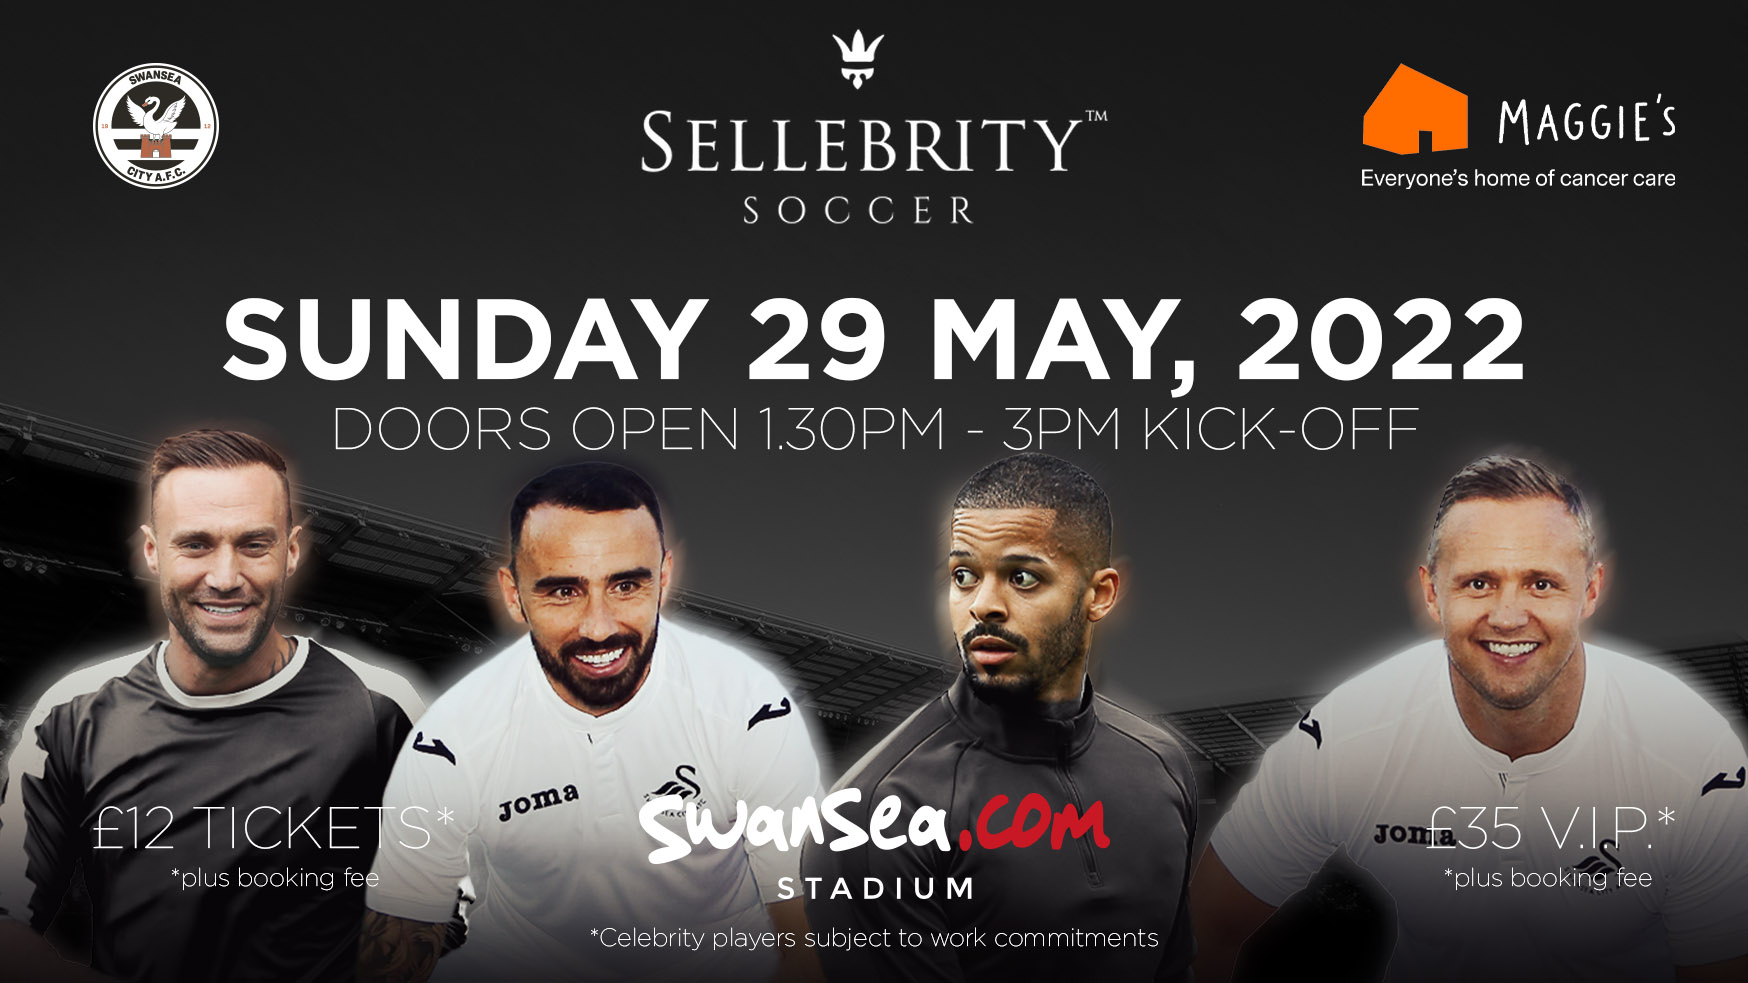 Sellebrity Soccer to host fundraising football match at the Stadium in memory of Nev